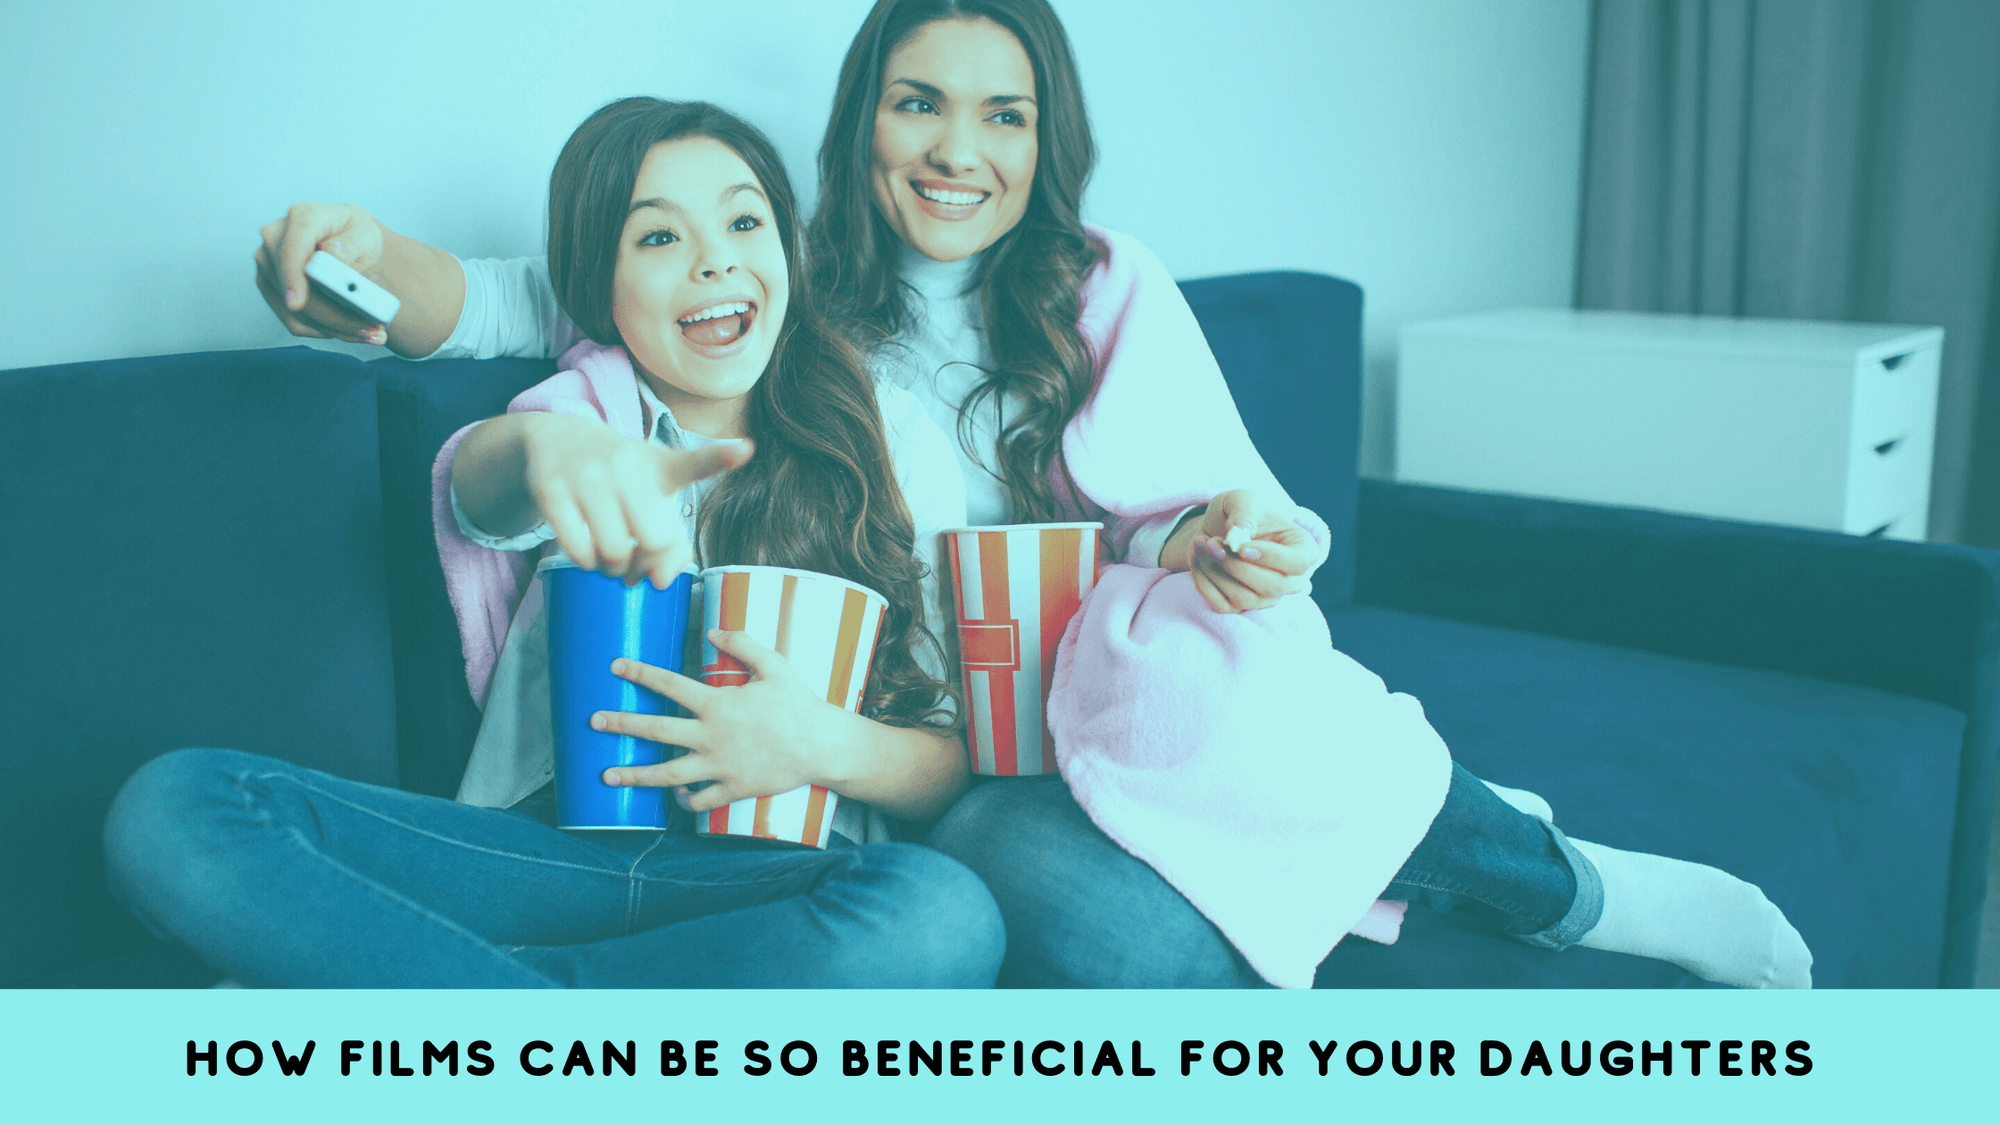 How films can be so beneficial for your daughters